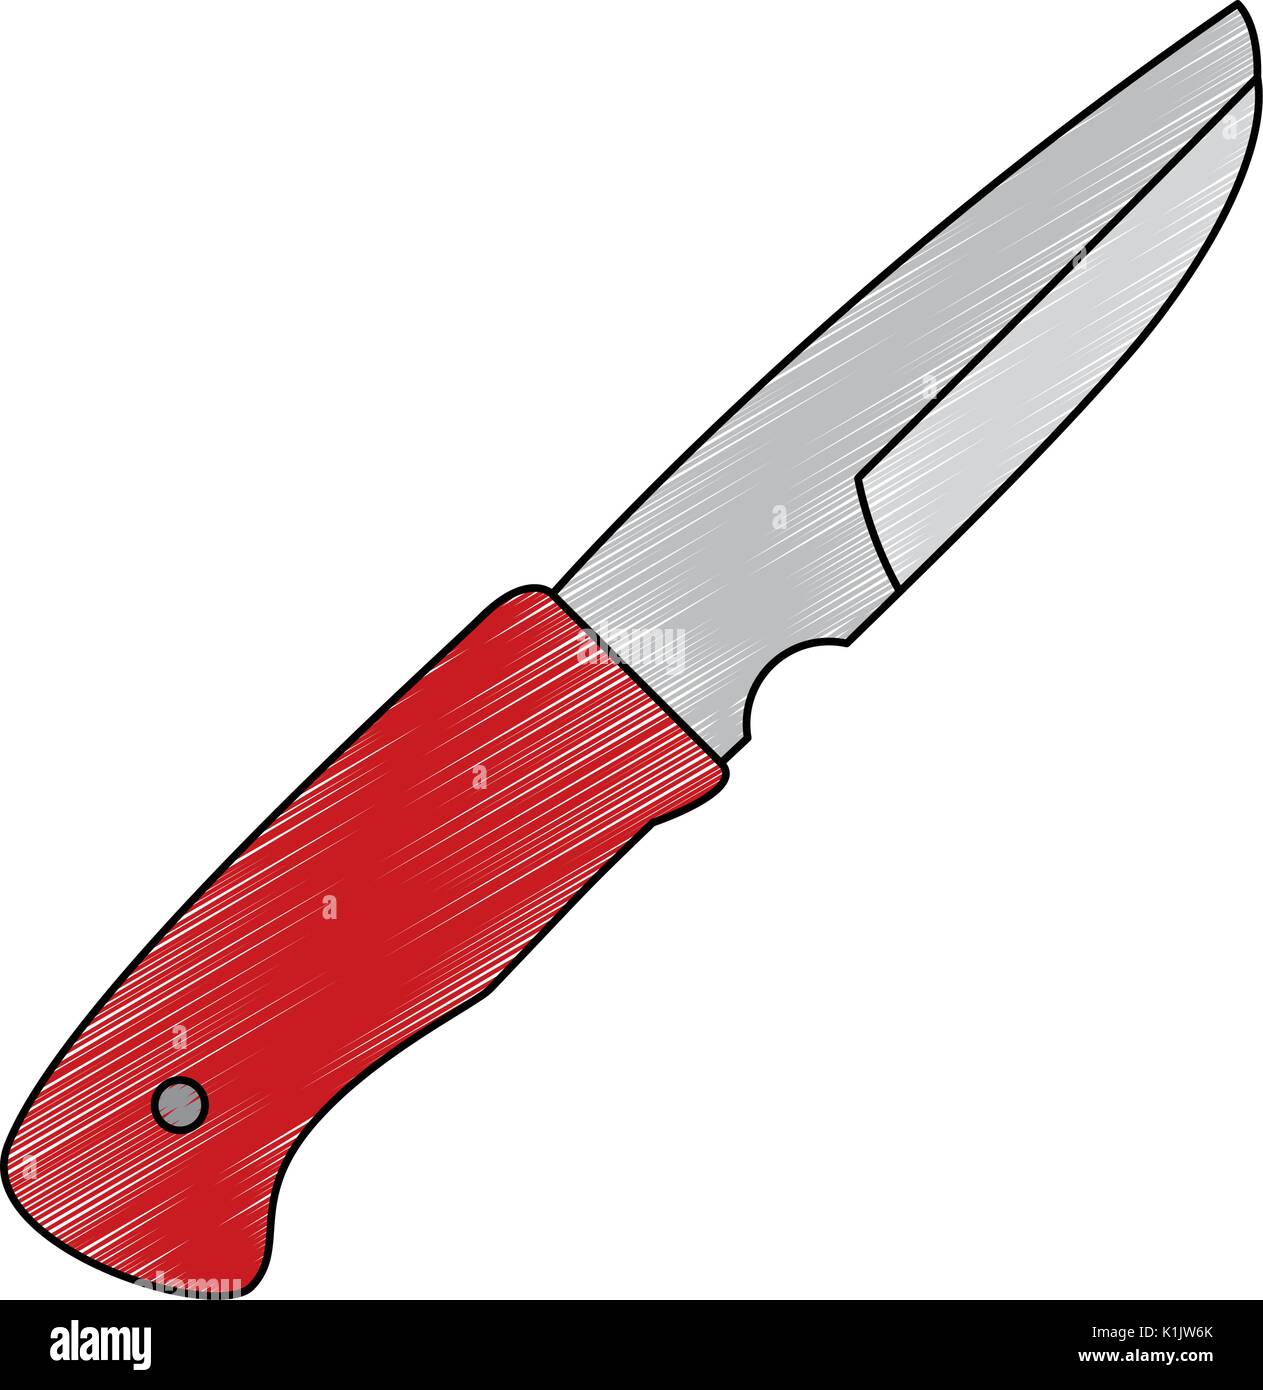 Camping knife tool icon vector illustration graphic design Stock Vector  Image & Art - Alamy